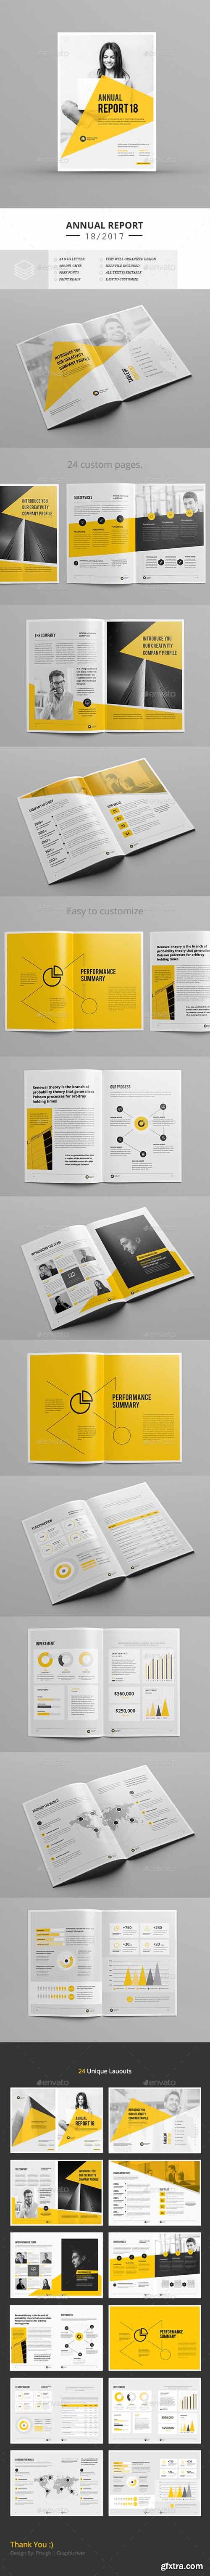 GR - Annual Report Template 19863754